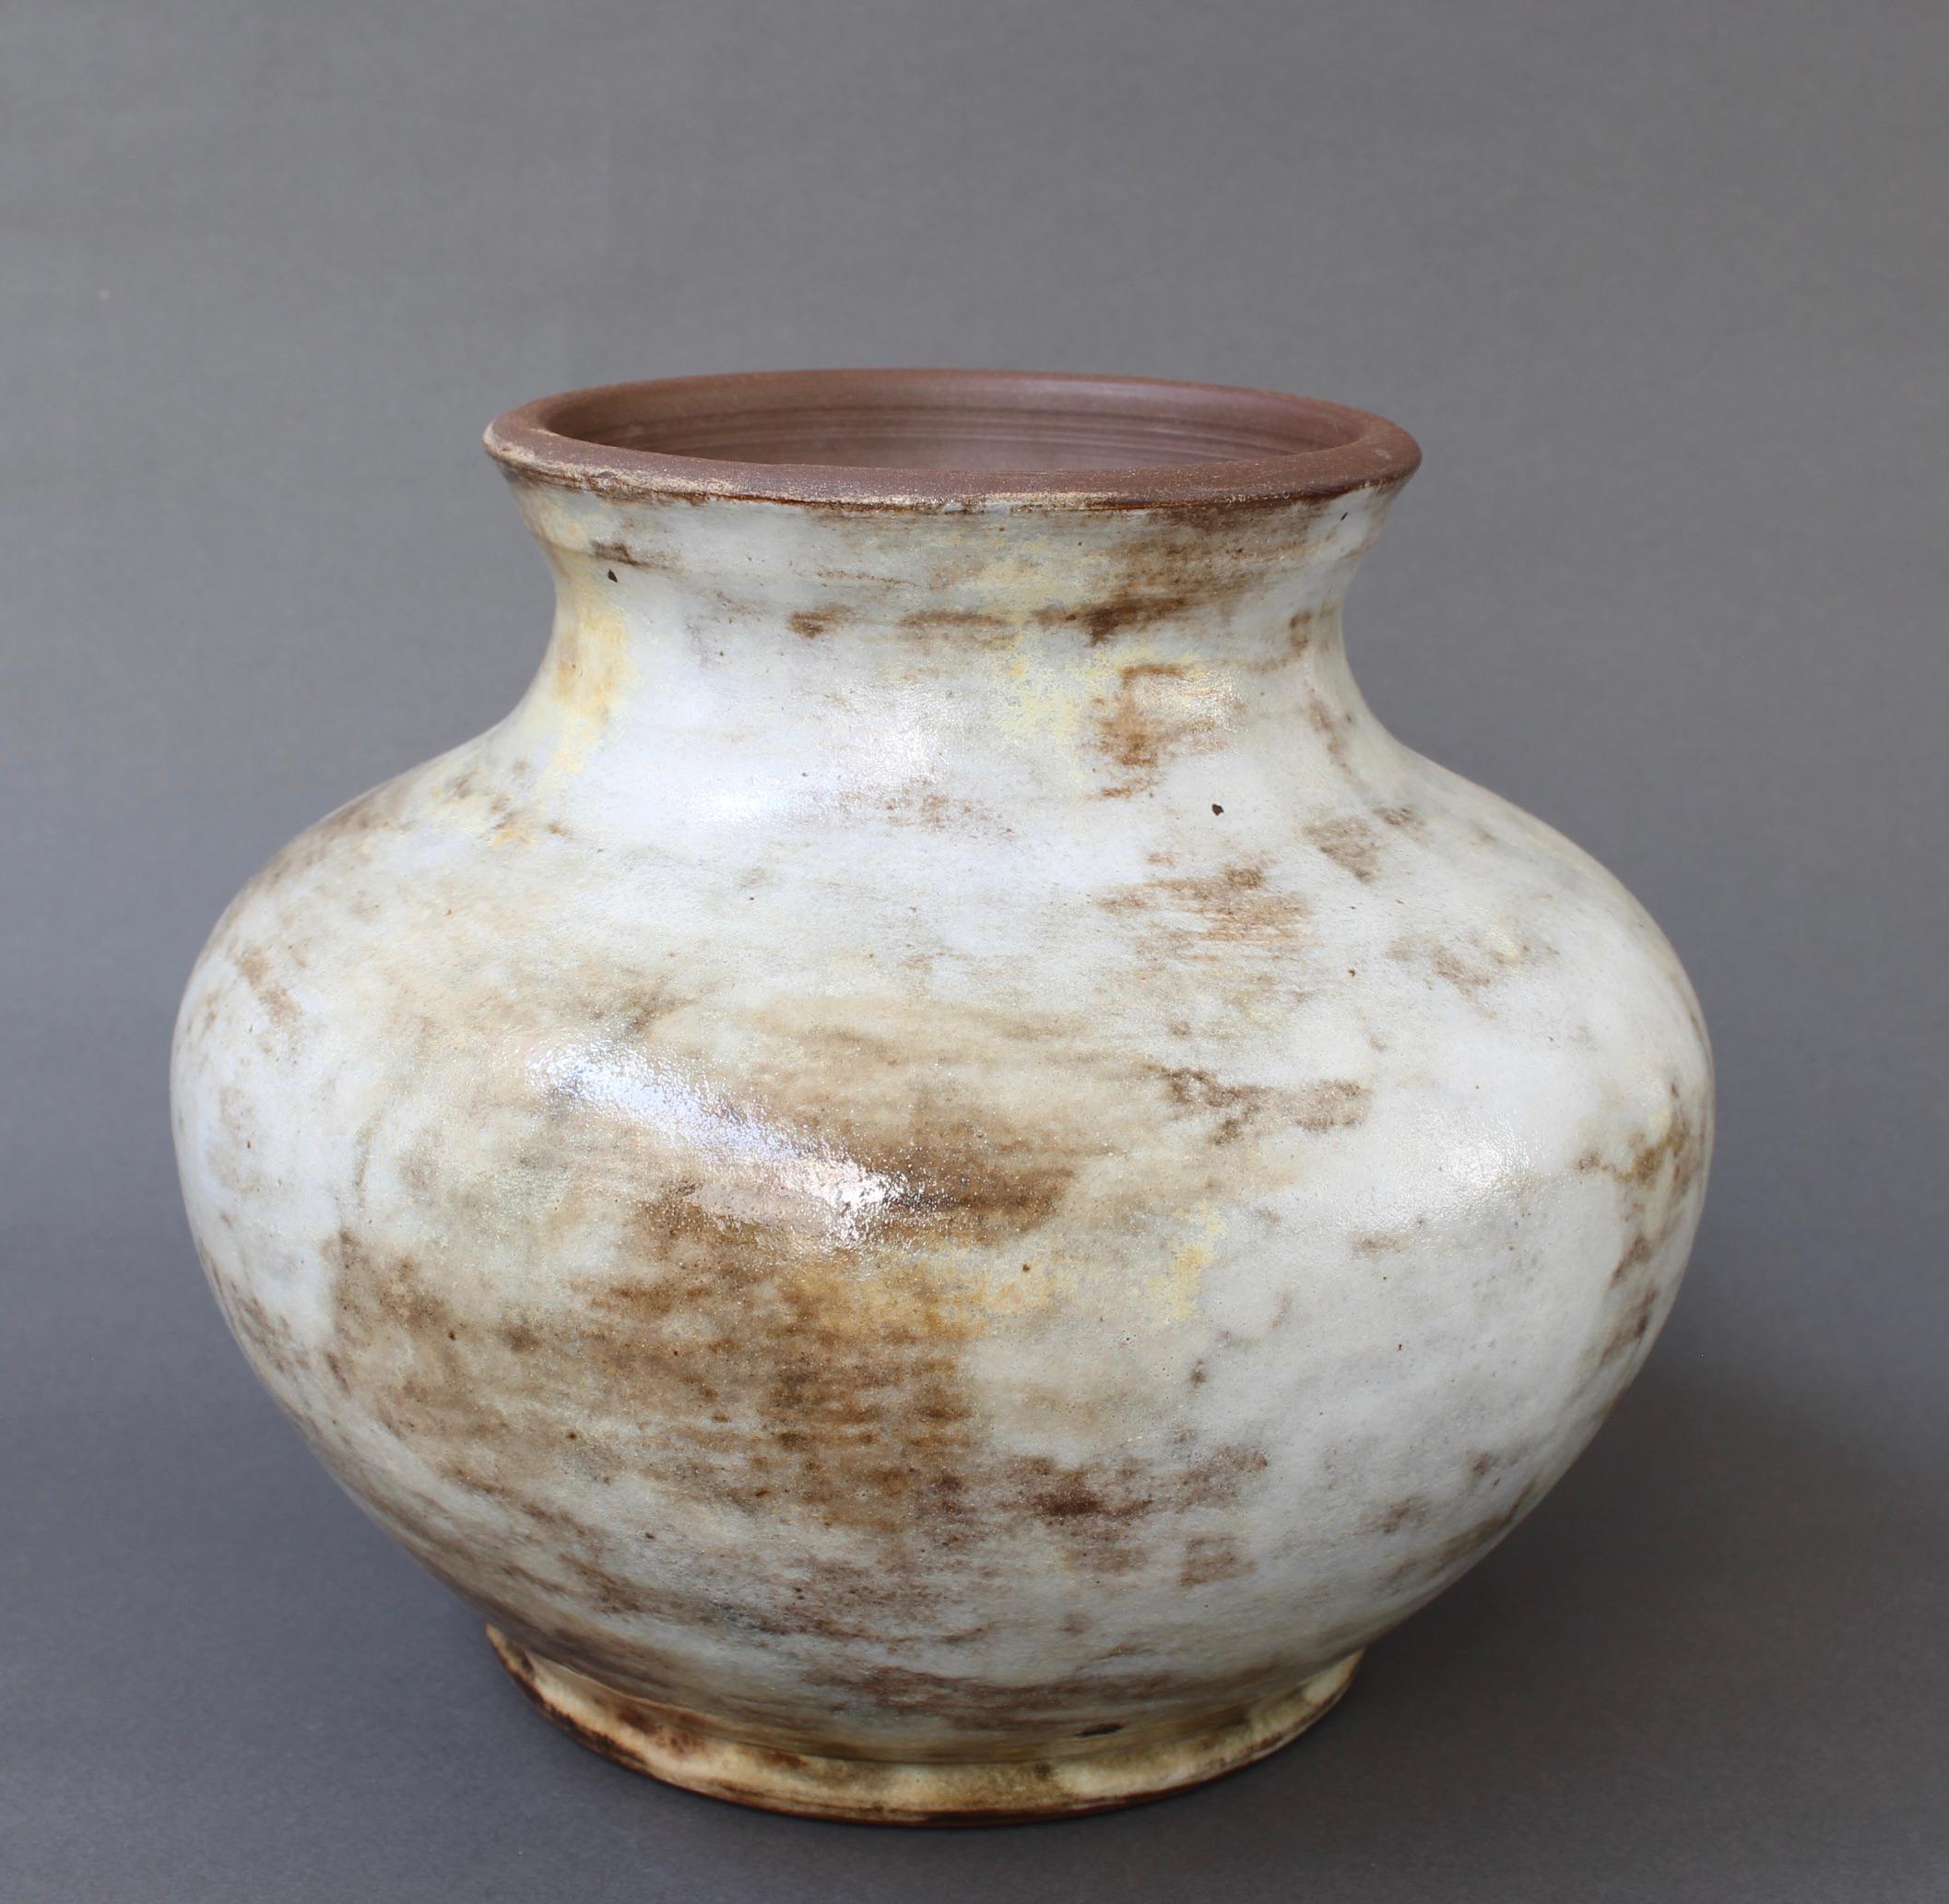 French ceramic decorative vase by Alexandre Kostanda, Vallauris, France (circa 1960s). In his trademark natural clay and rustic style, Kostanda created beautifully original vessels, such as vases, pitchers and pots which were both utilitarian and